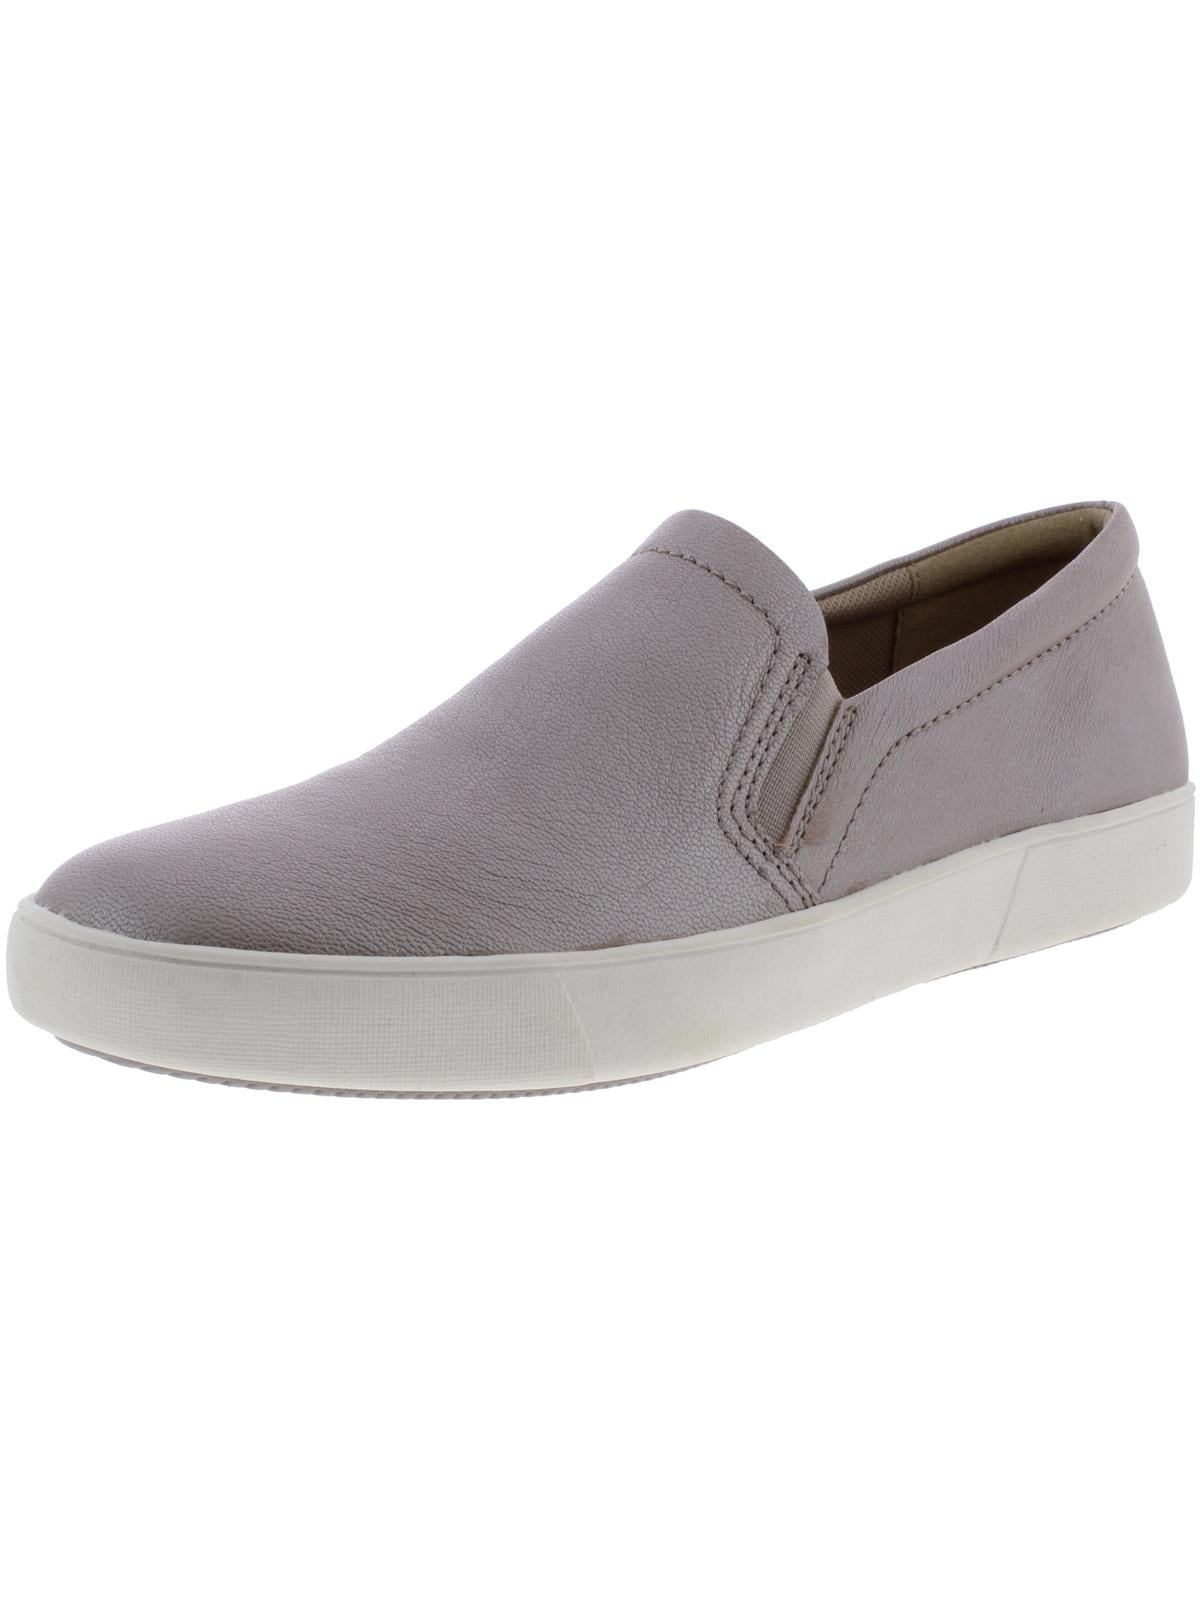 Naturalizer Womens Marianne Leather Slip On Fashion Sneakers - Walmart.com